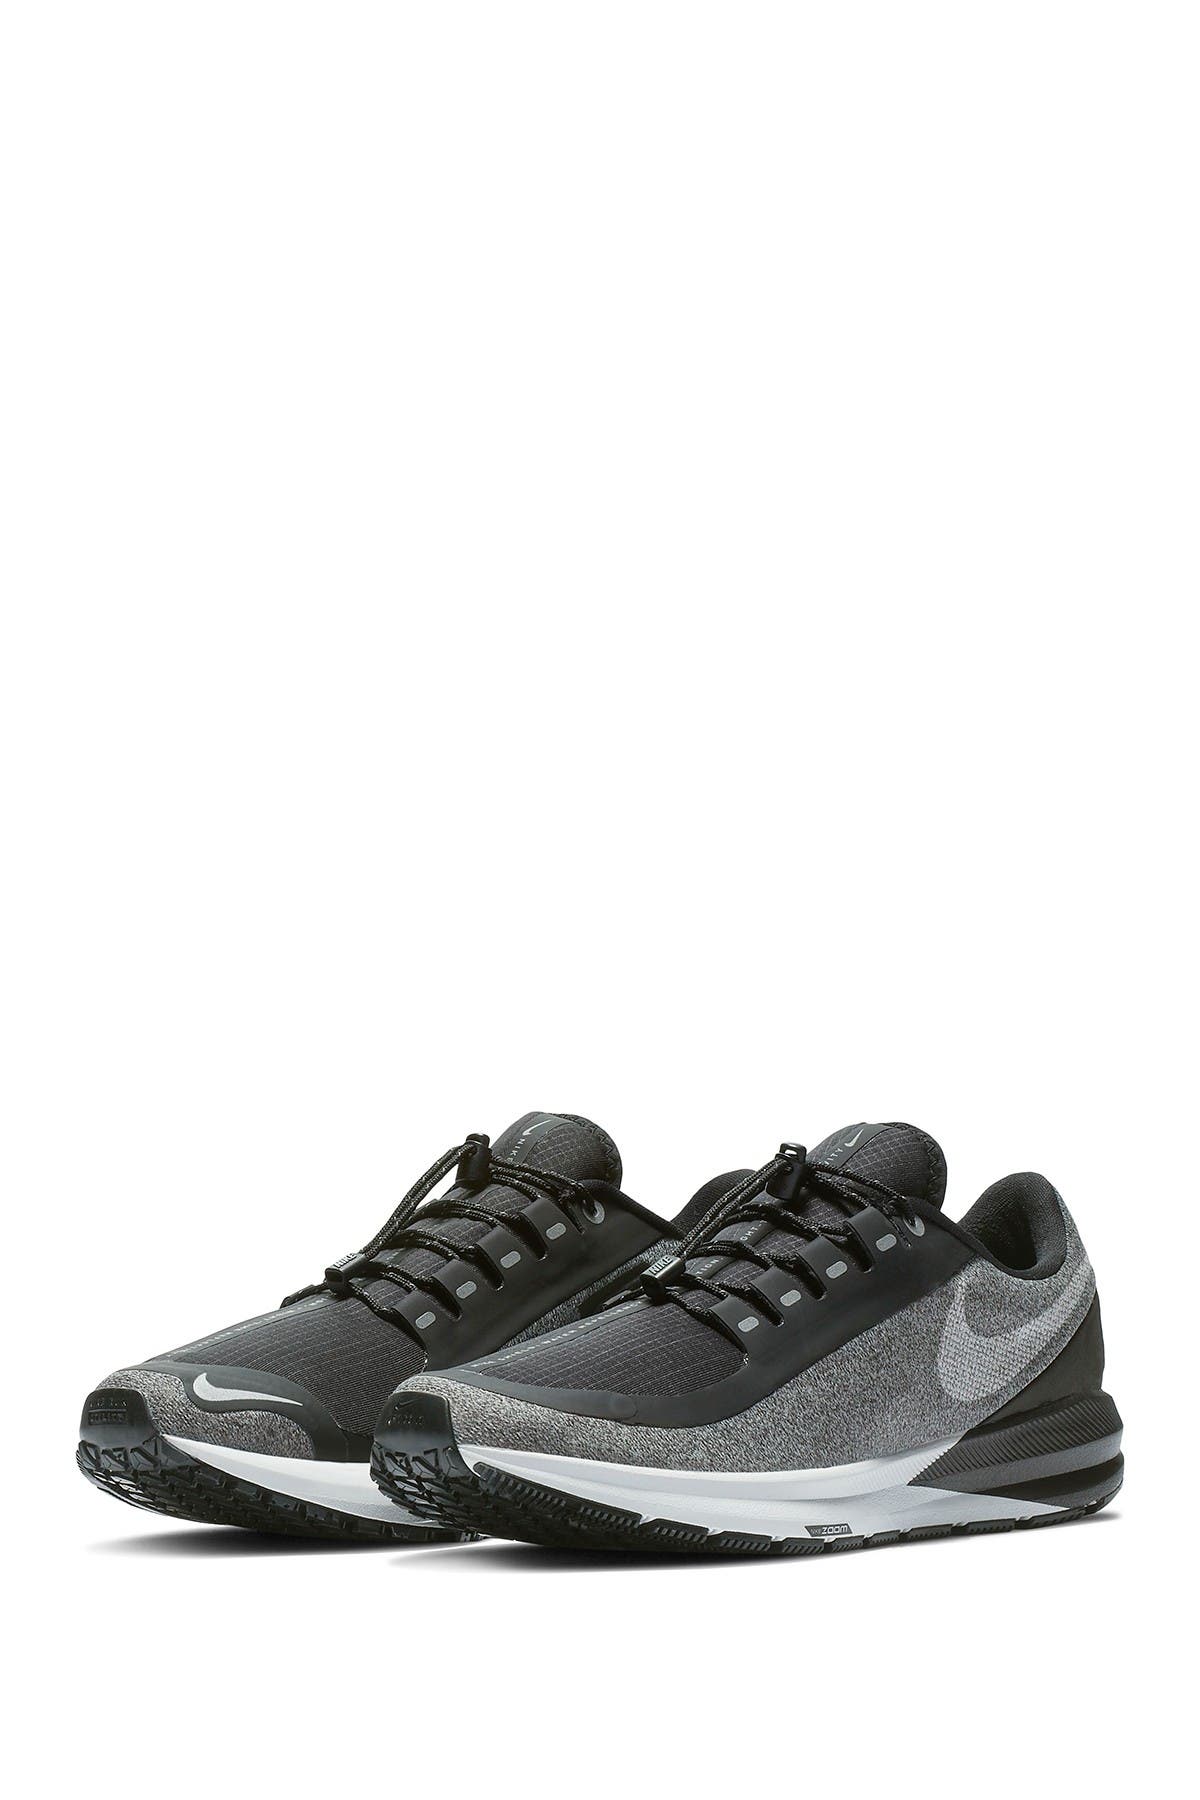 nike zoom structure 22 shield